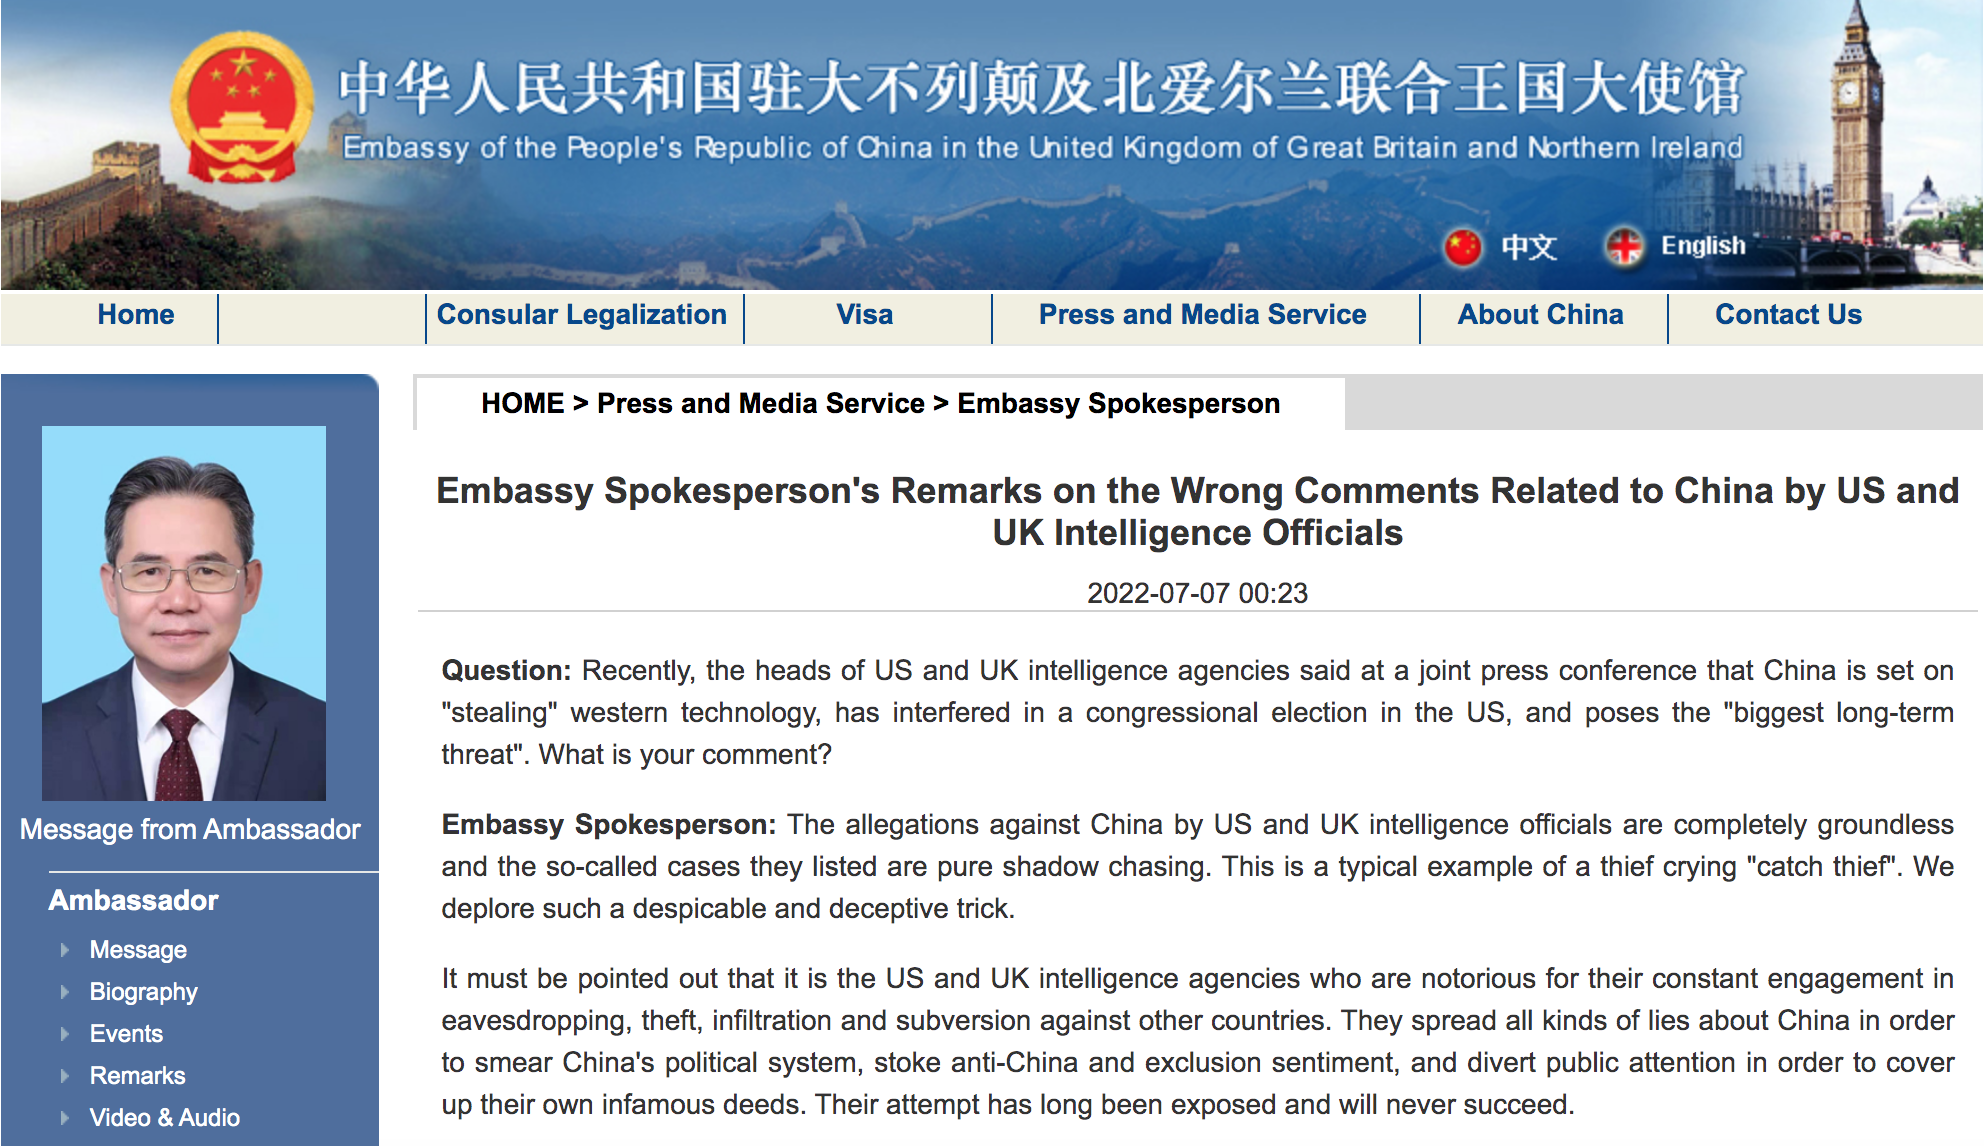 Embassy Spokesperson's Remarks on the Wrong Comments Related to China by US and UK Intelligence Officials Source: The Chinese Embassy in the UK